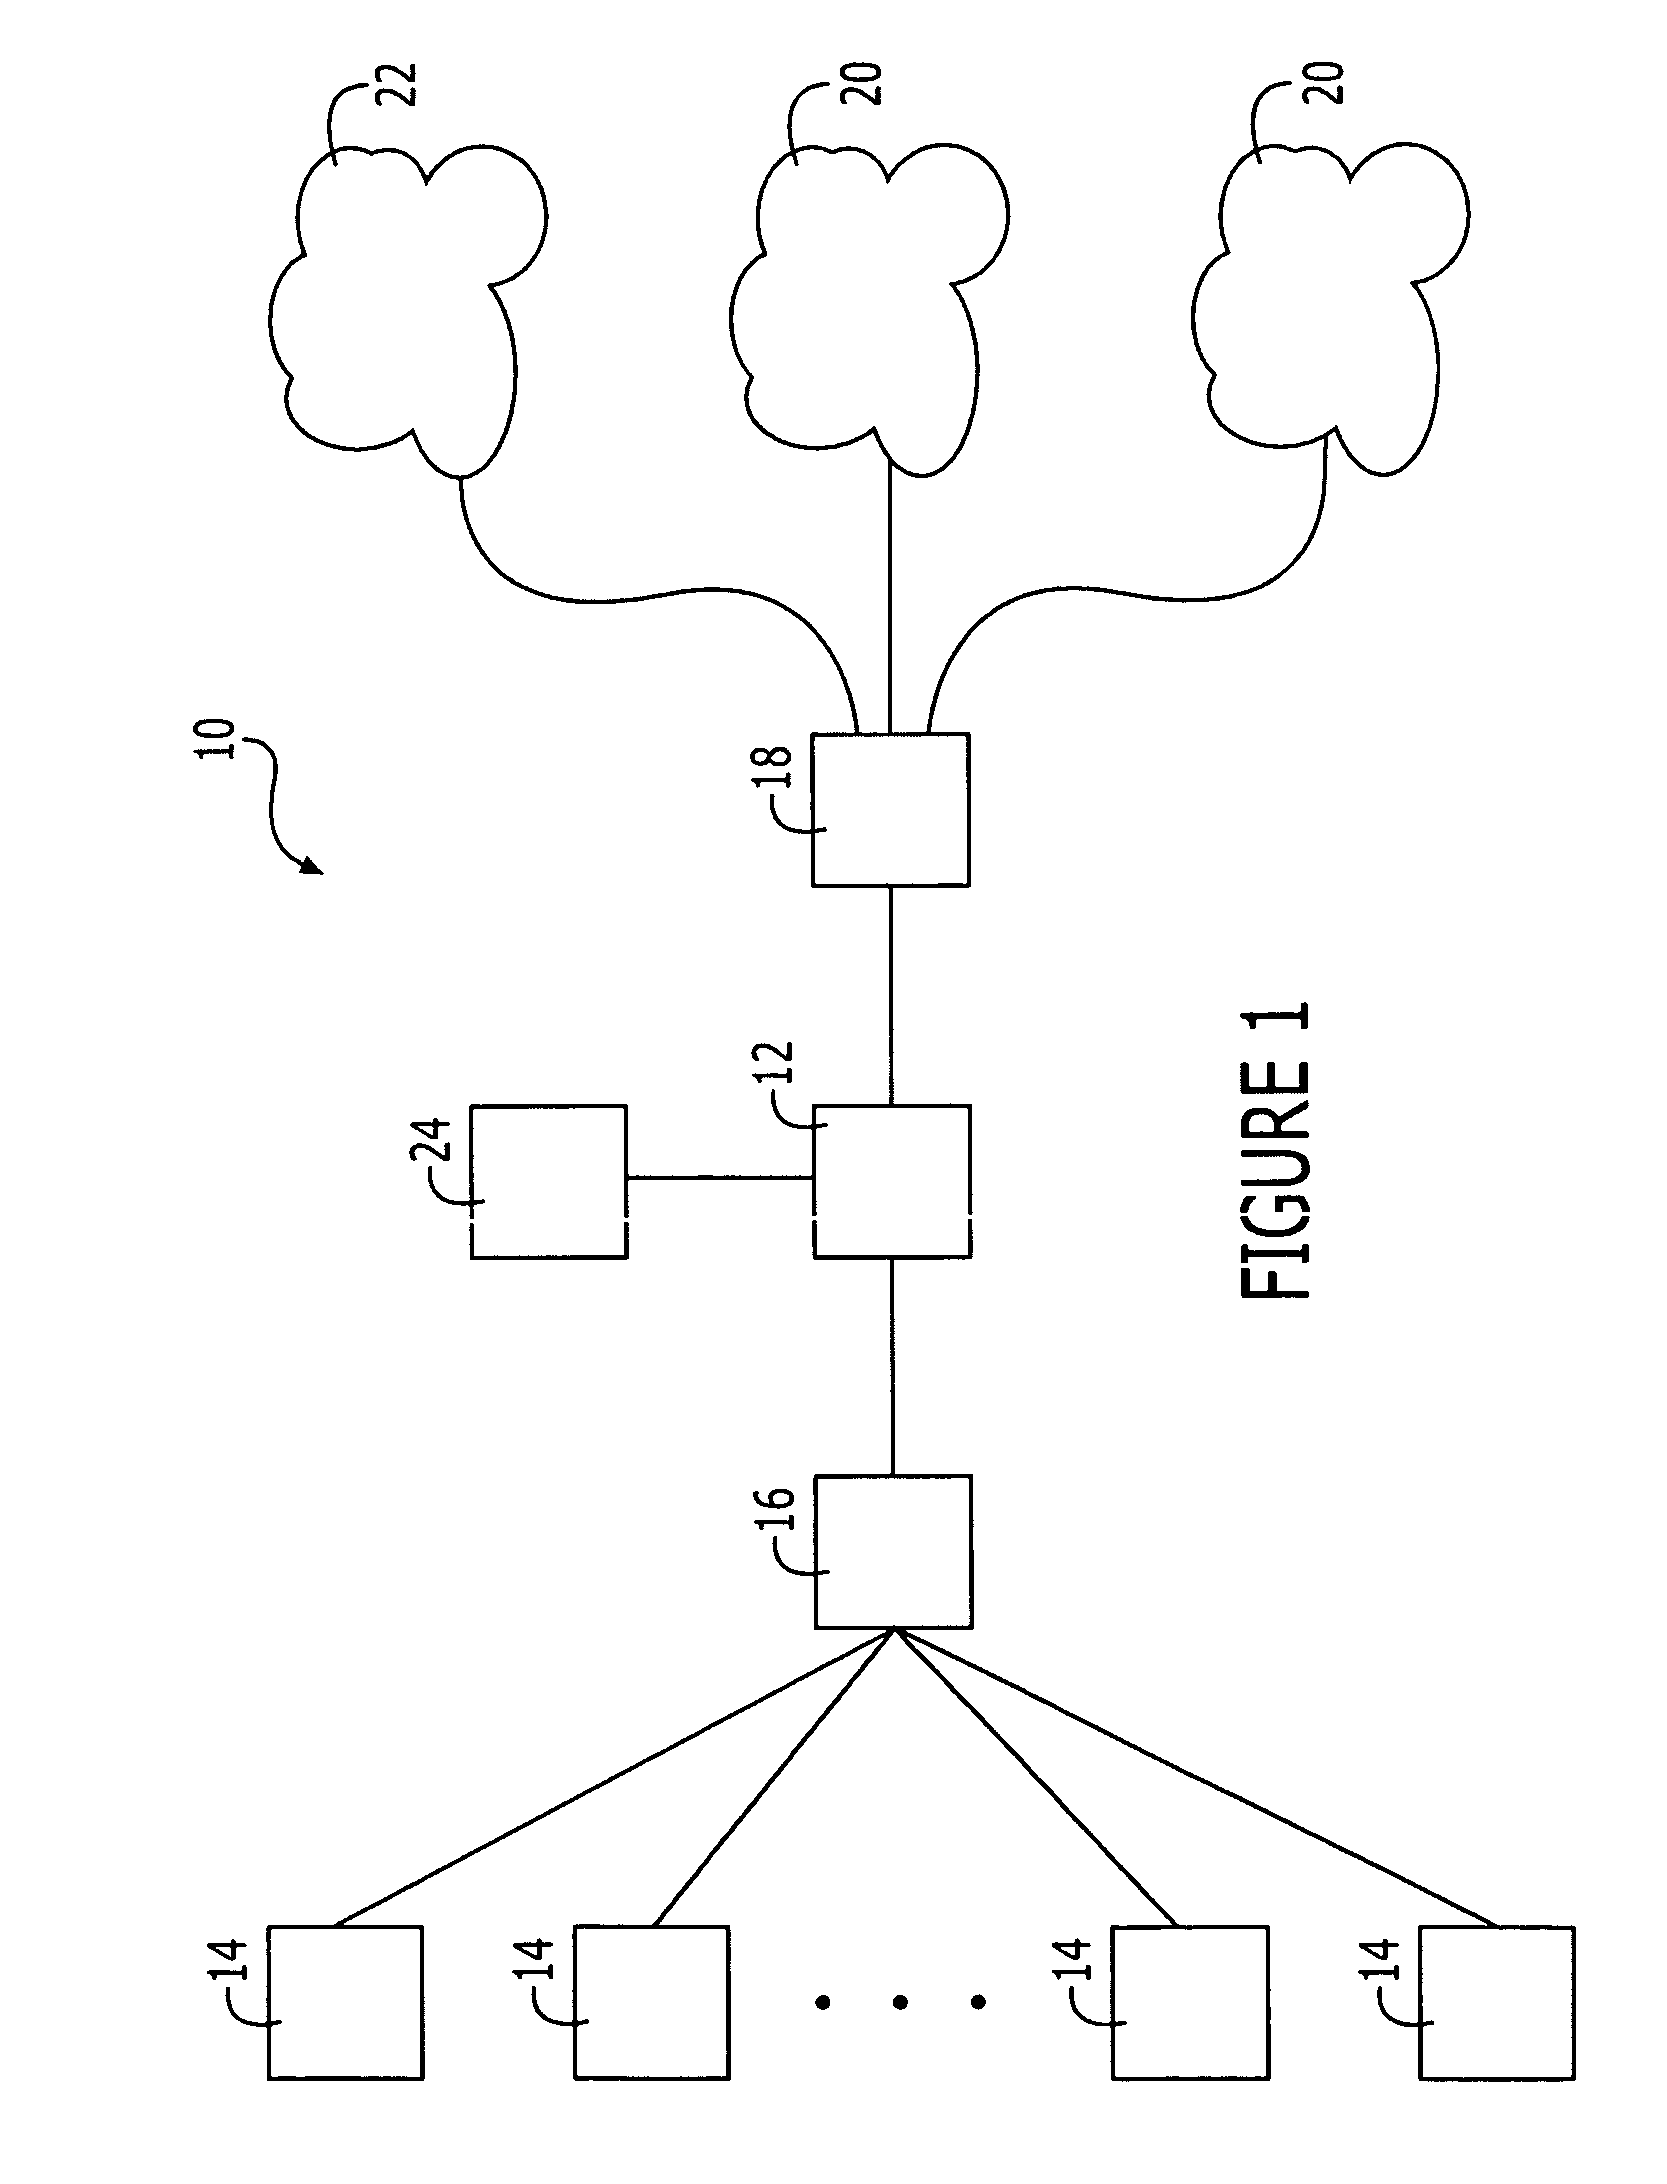 Location-based identification for use in a communications network